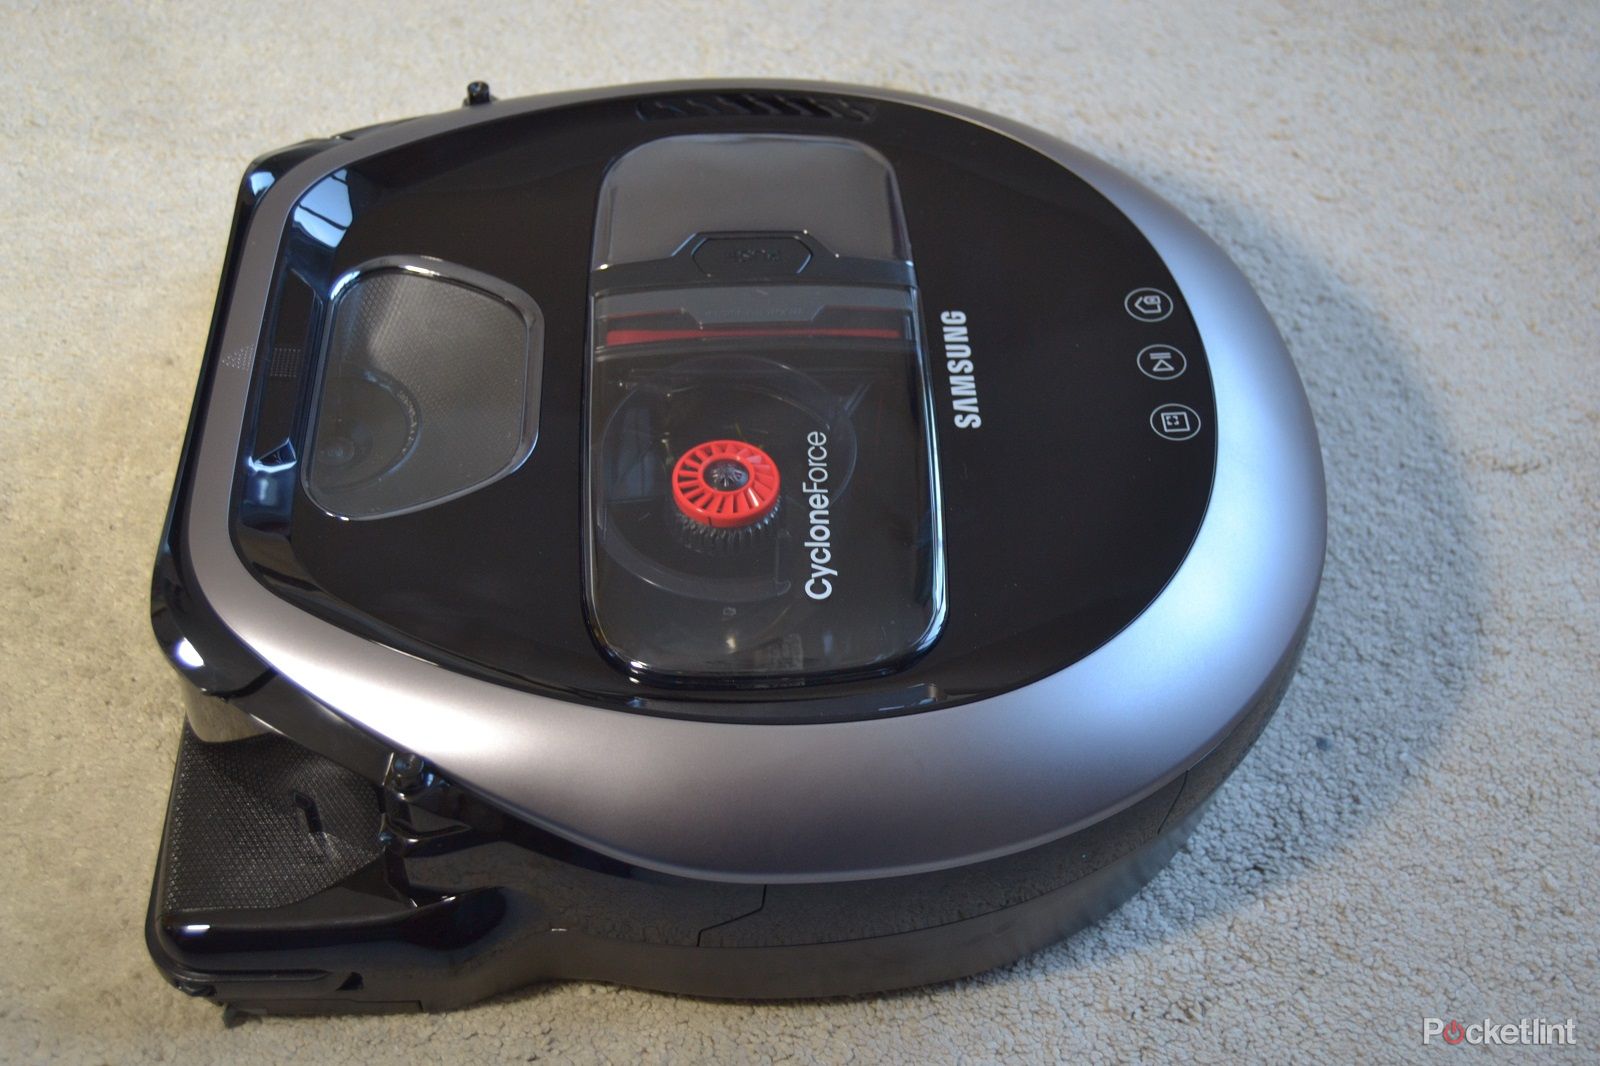 Samsung Robot Vacuum Cleaner Review image 3